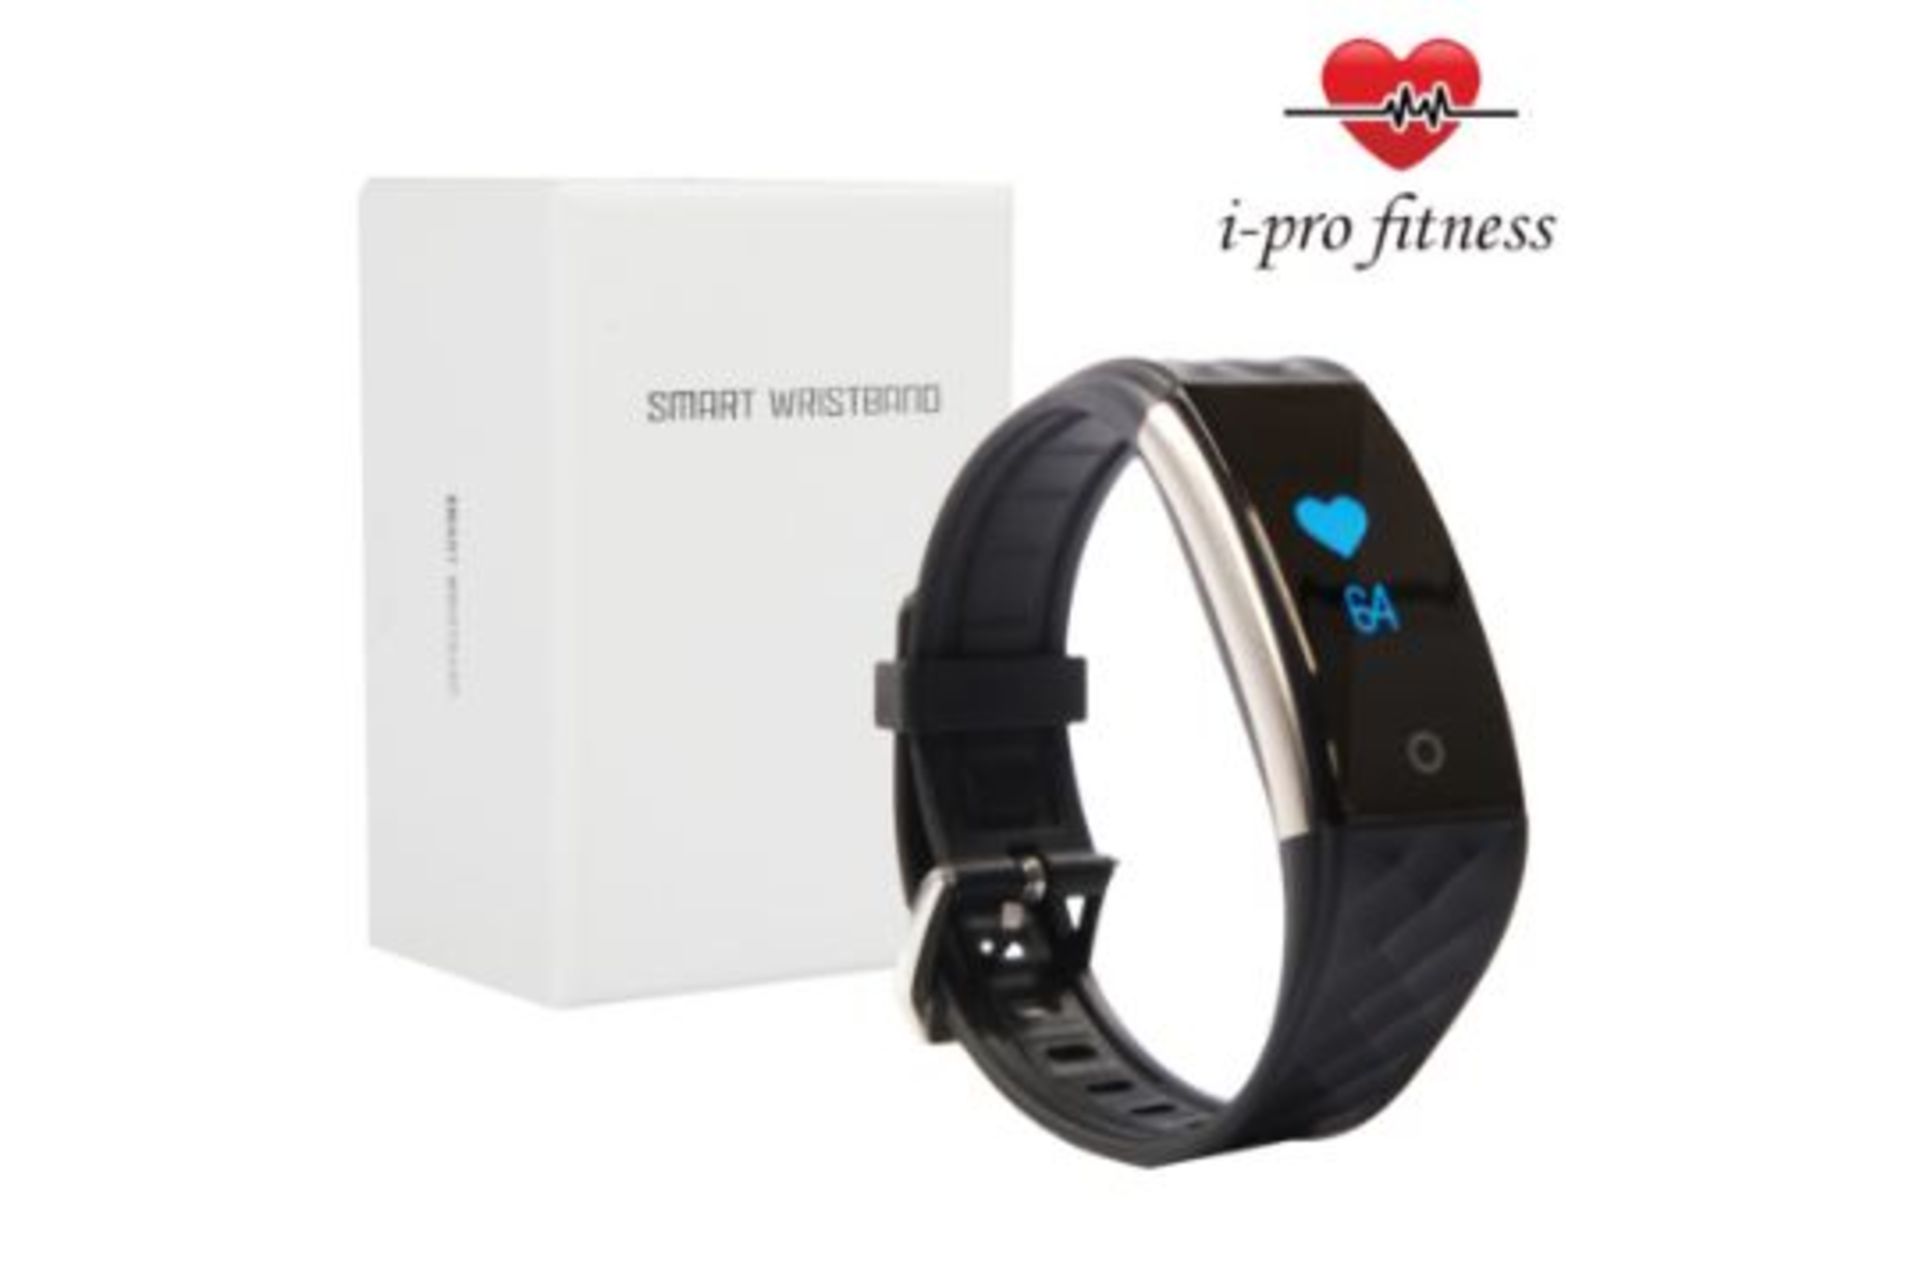 I-Pro S2 Waterproof Fitness Tracker With Heart Rate Monitor - Image 4 of 7